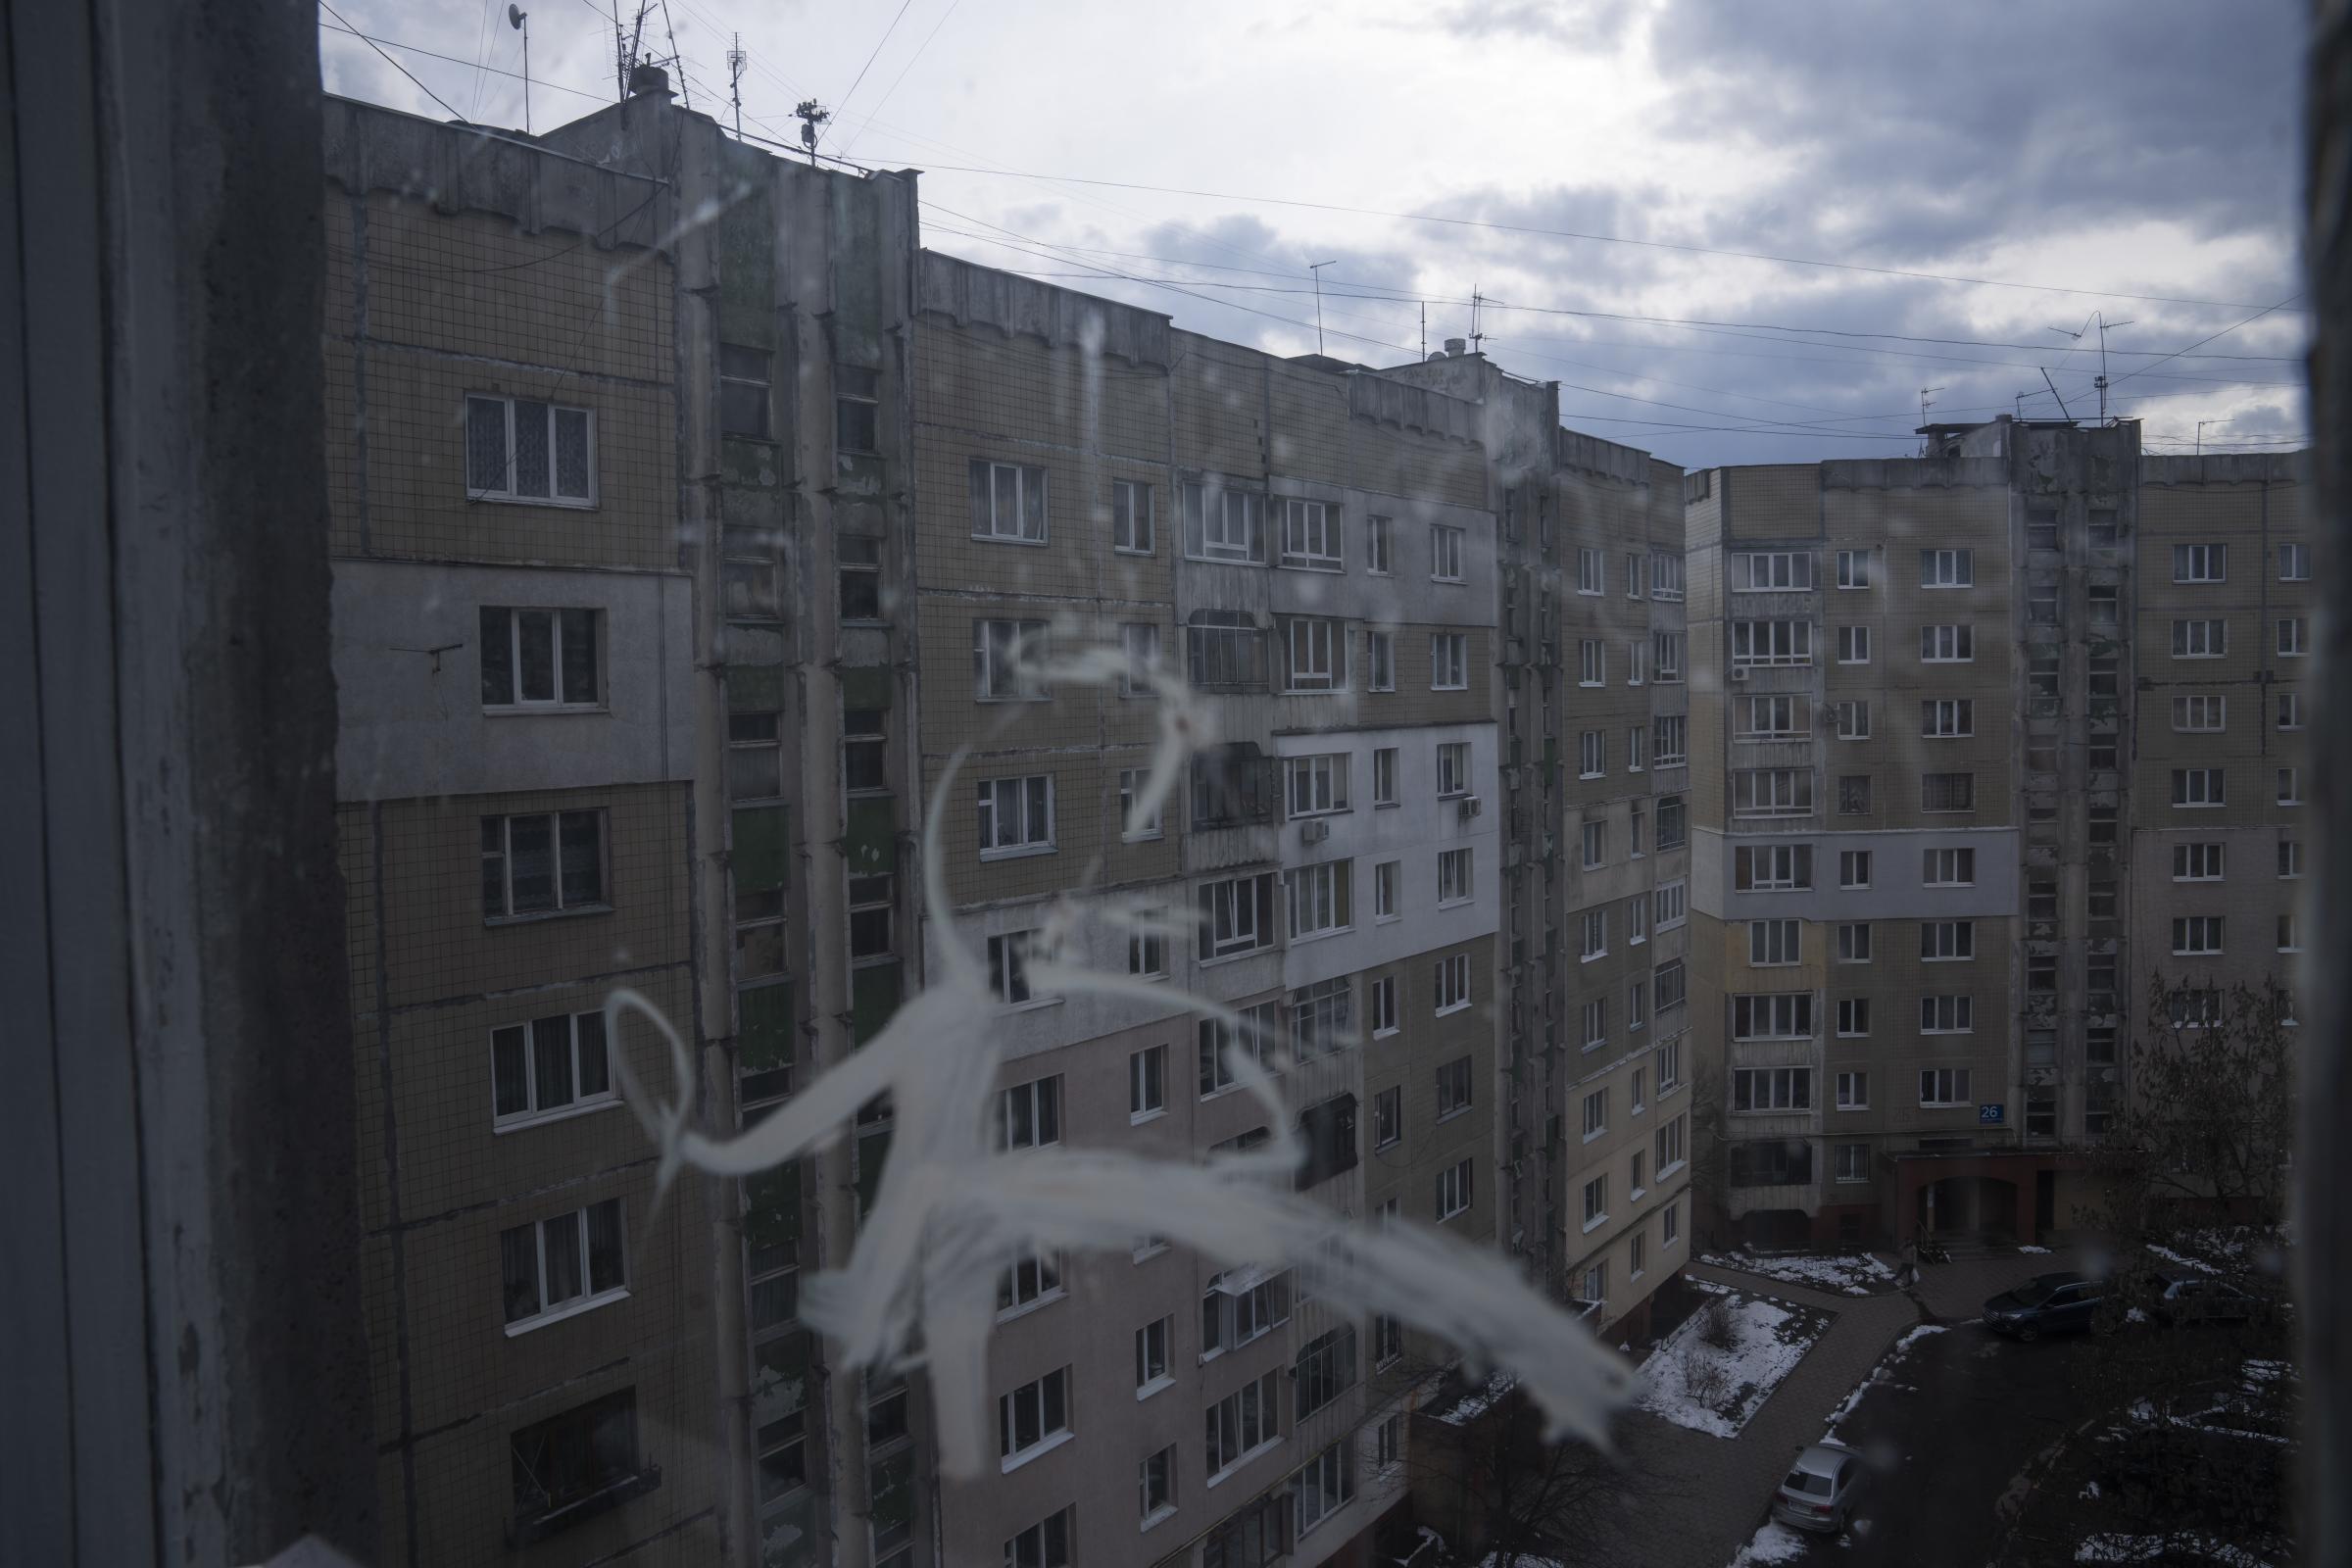 A general view of an apartment block seen from the kitchen window, where the Shlapak family, who are internally displaced from Kharkiv, took refuge.